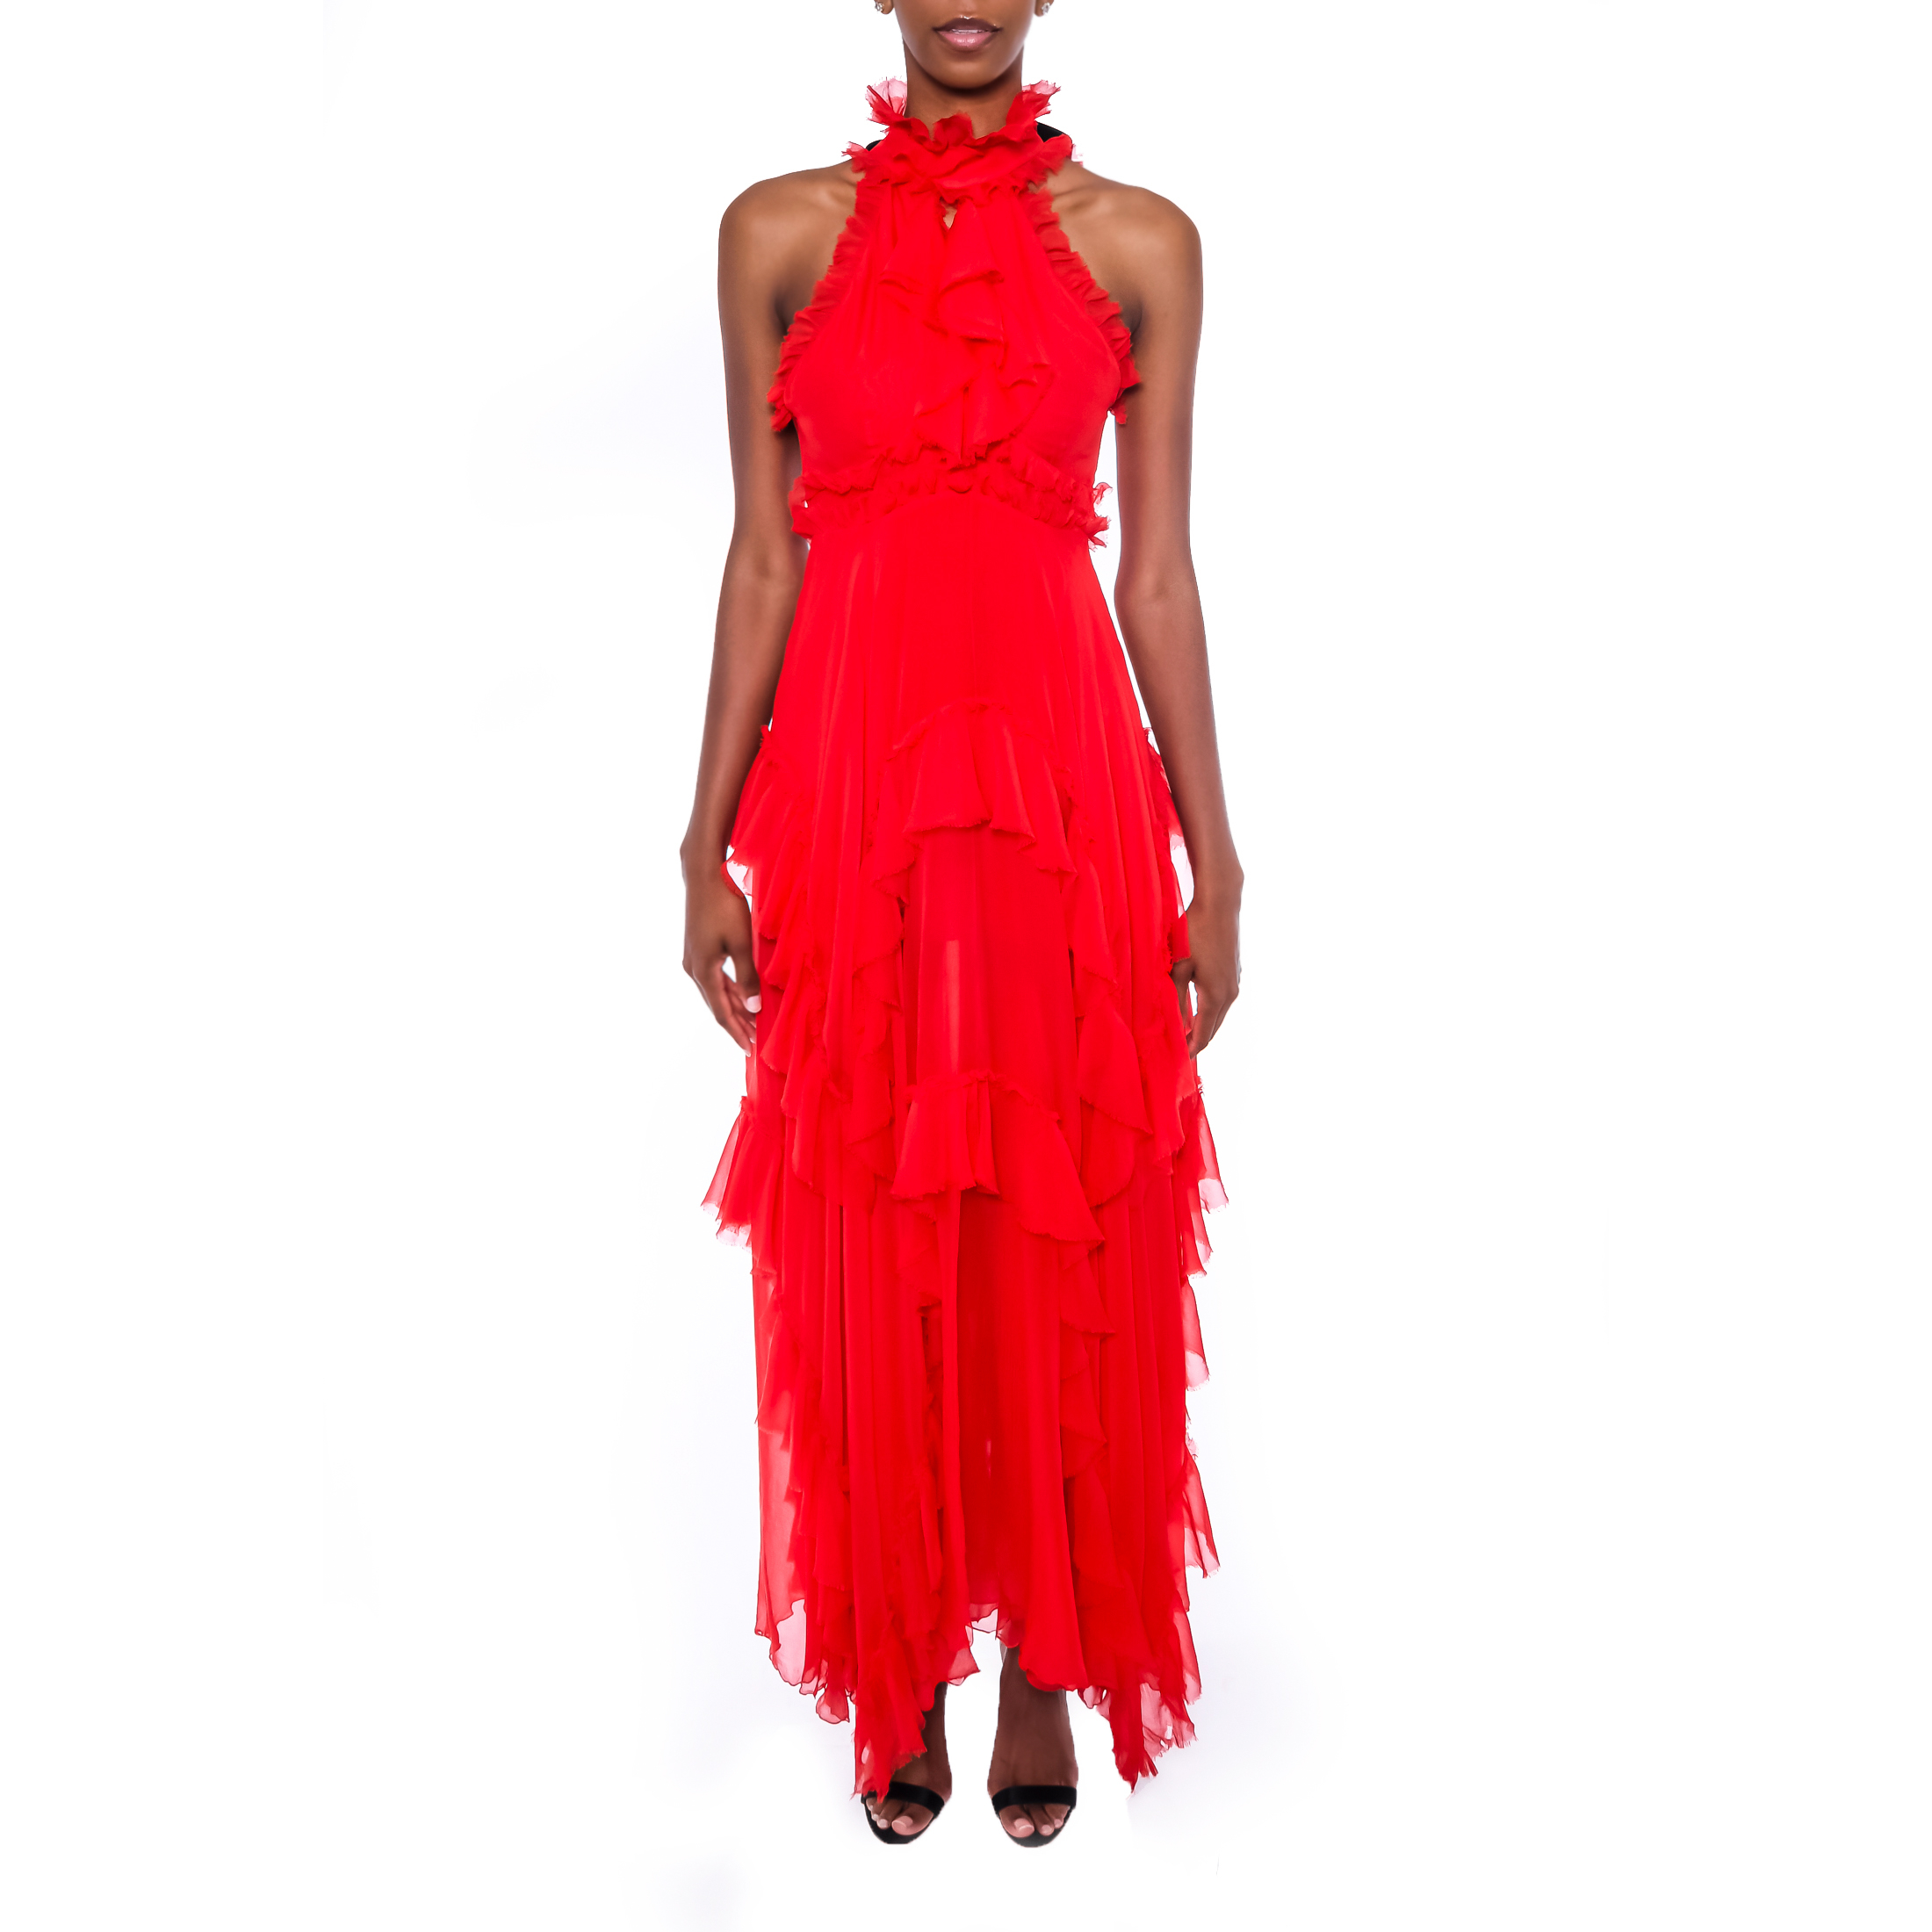 Emilio Pucci Ruffle Red Evening Gown - Janet Mandell